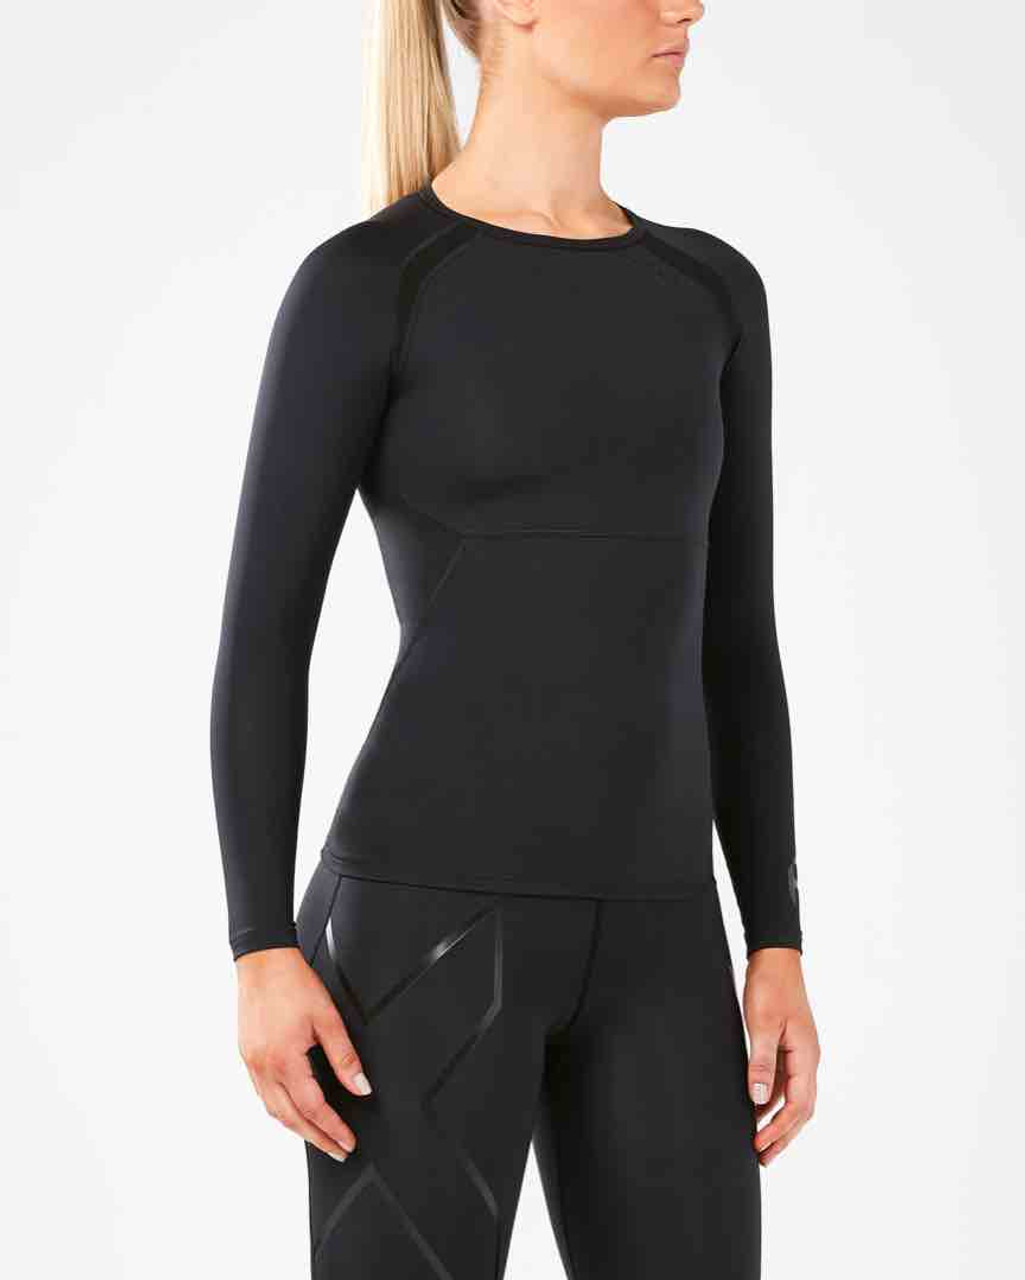 2XU Women's Refresh Recovery Compression L/S Top